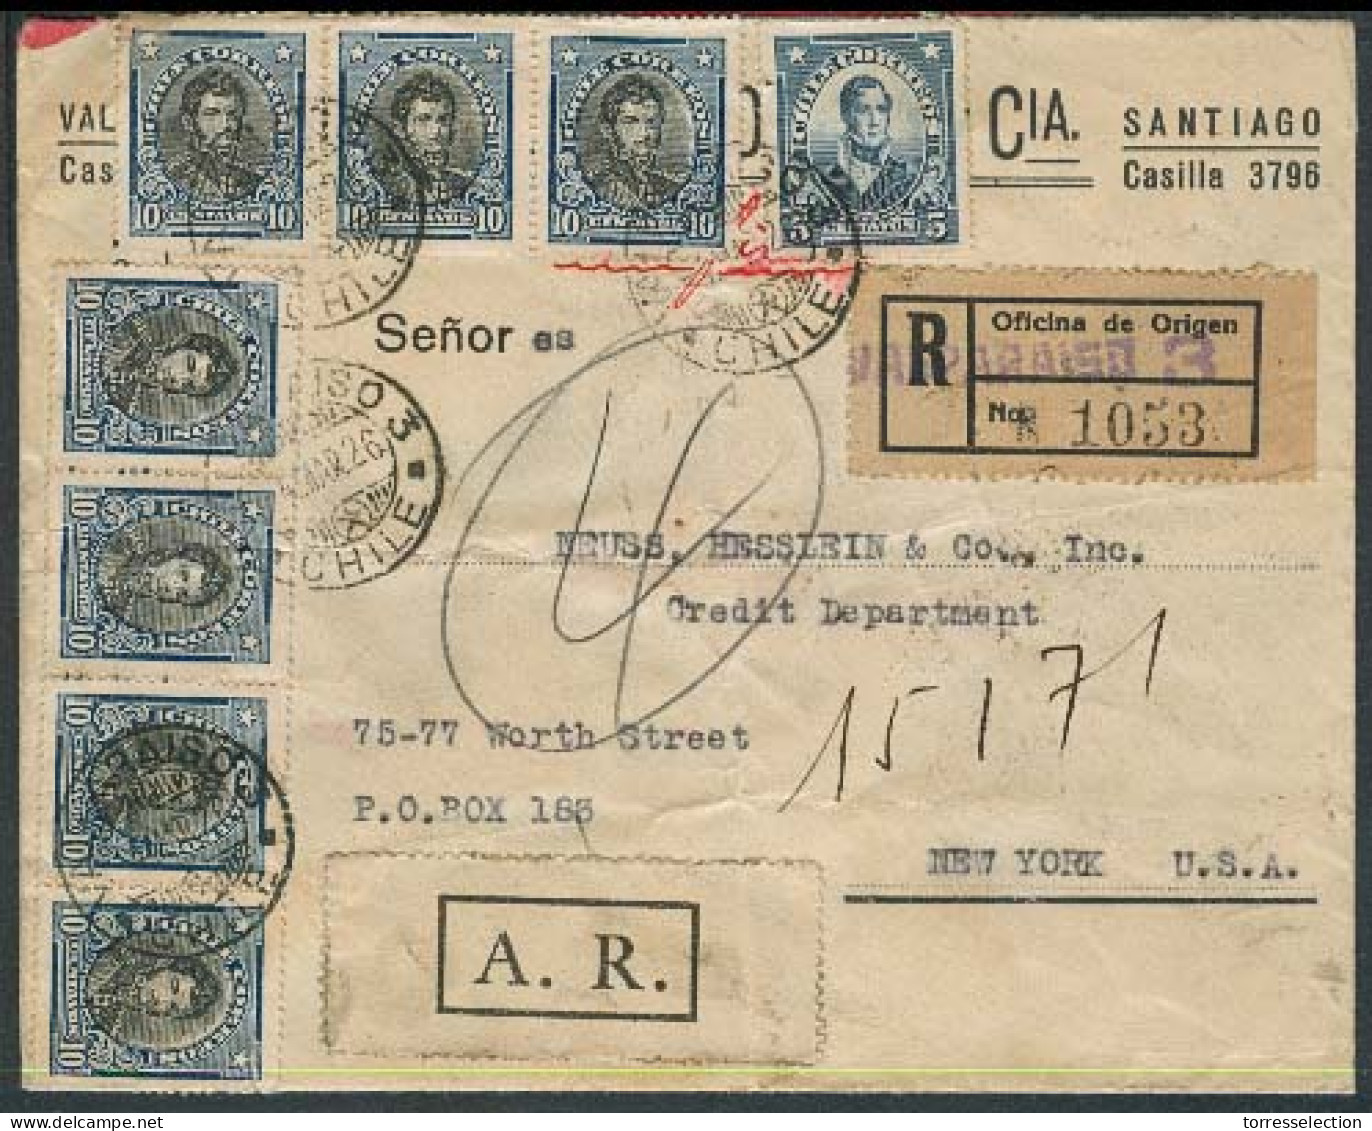 Chile - XX. 1926. Valp - USA. Reg AR Multifkd Env / 2 Diff Labels. VF + Scarce. Transits + Arrival Reverse. - Cile